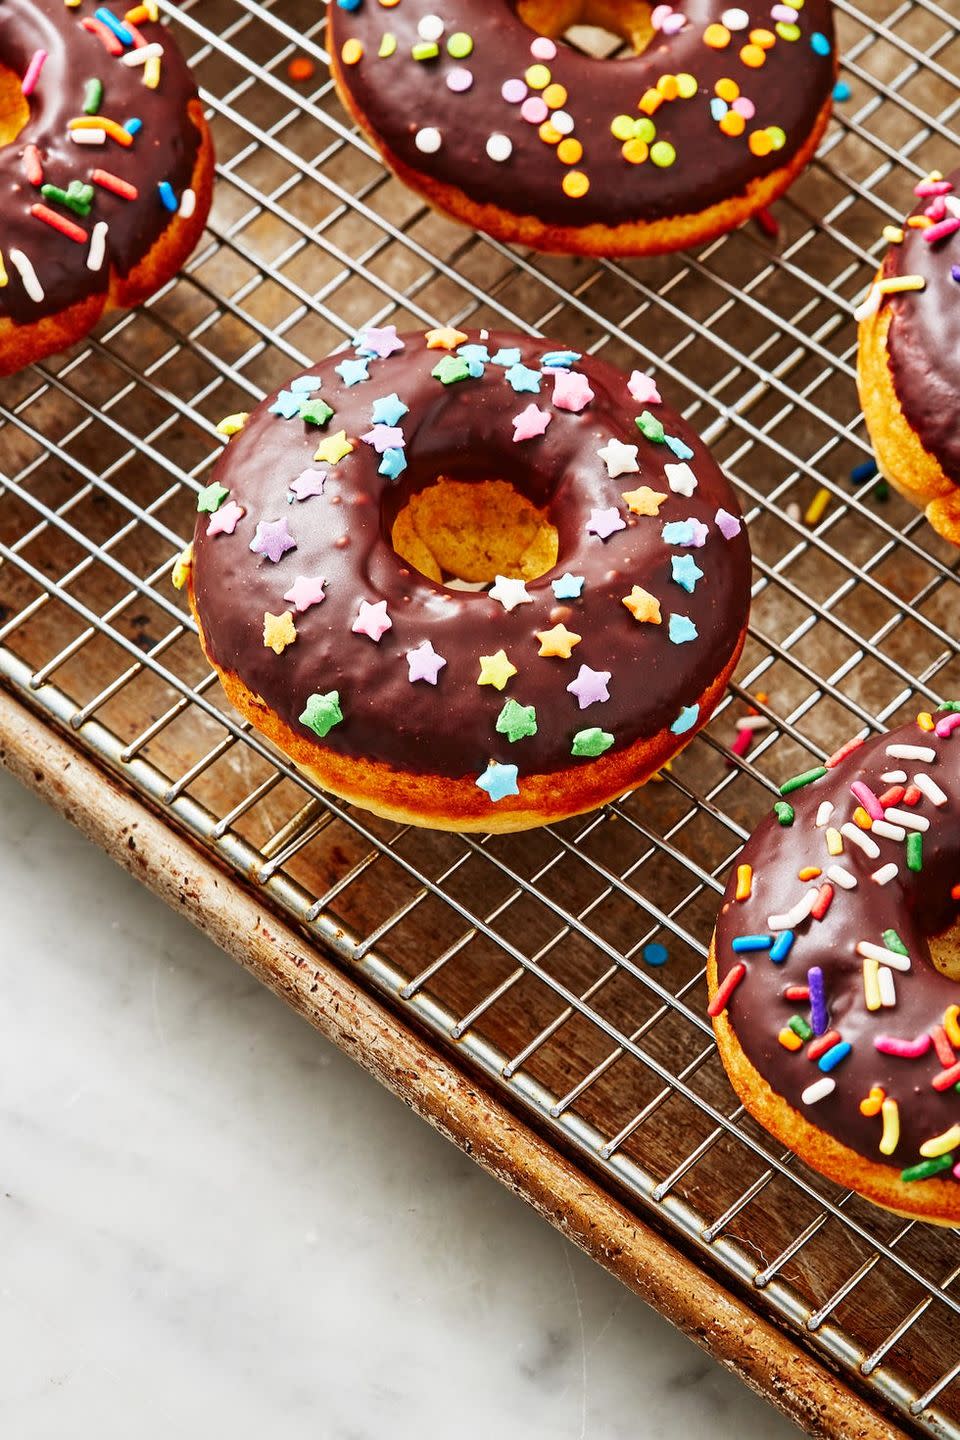 Baked Donuts